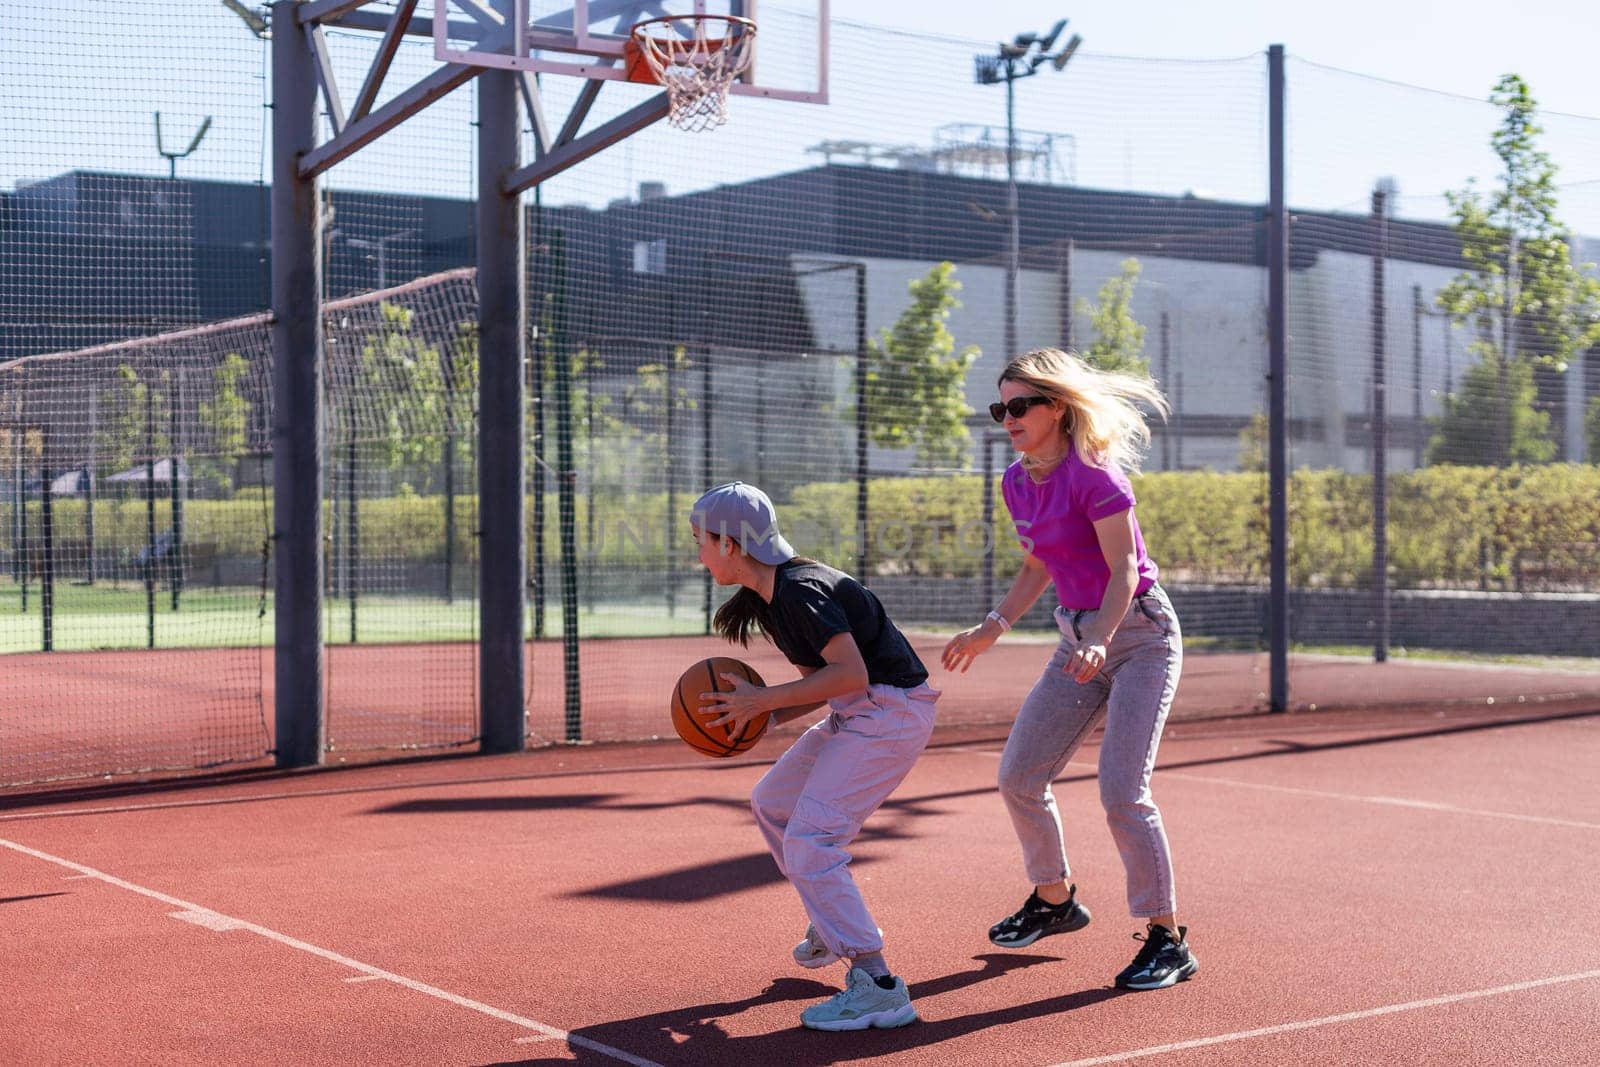 A Happy mother and child daughter outside at basketball court. High quality photo